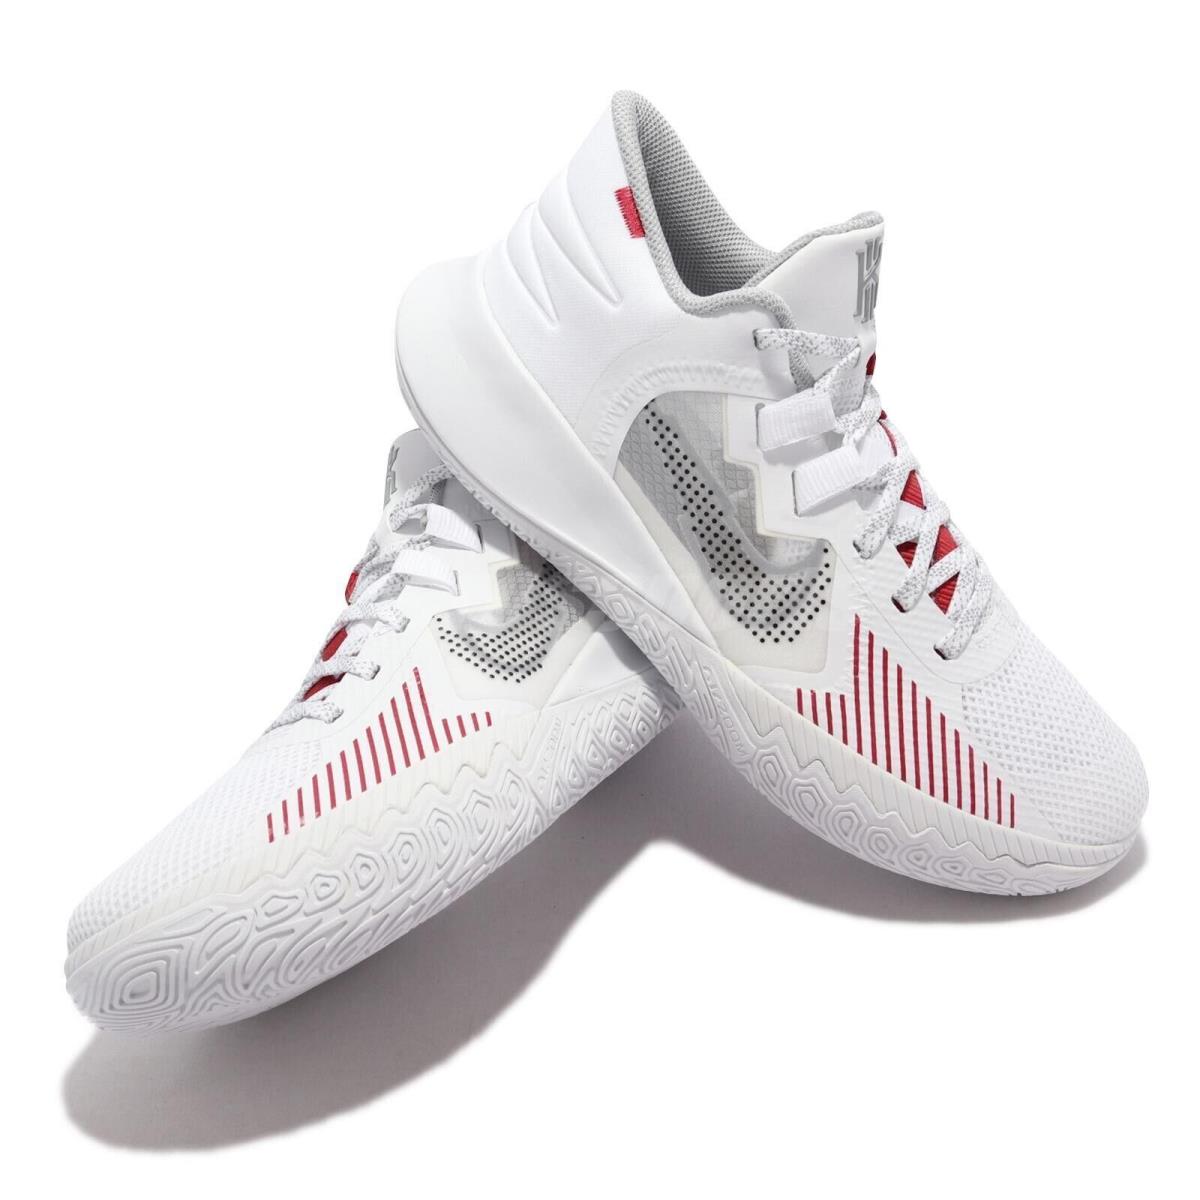 Nike shoes Kyrie - White/ Red , white/ red Manufacturer 2